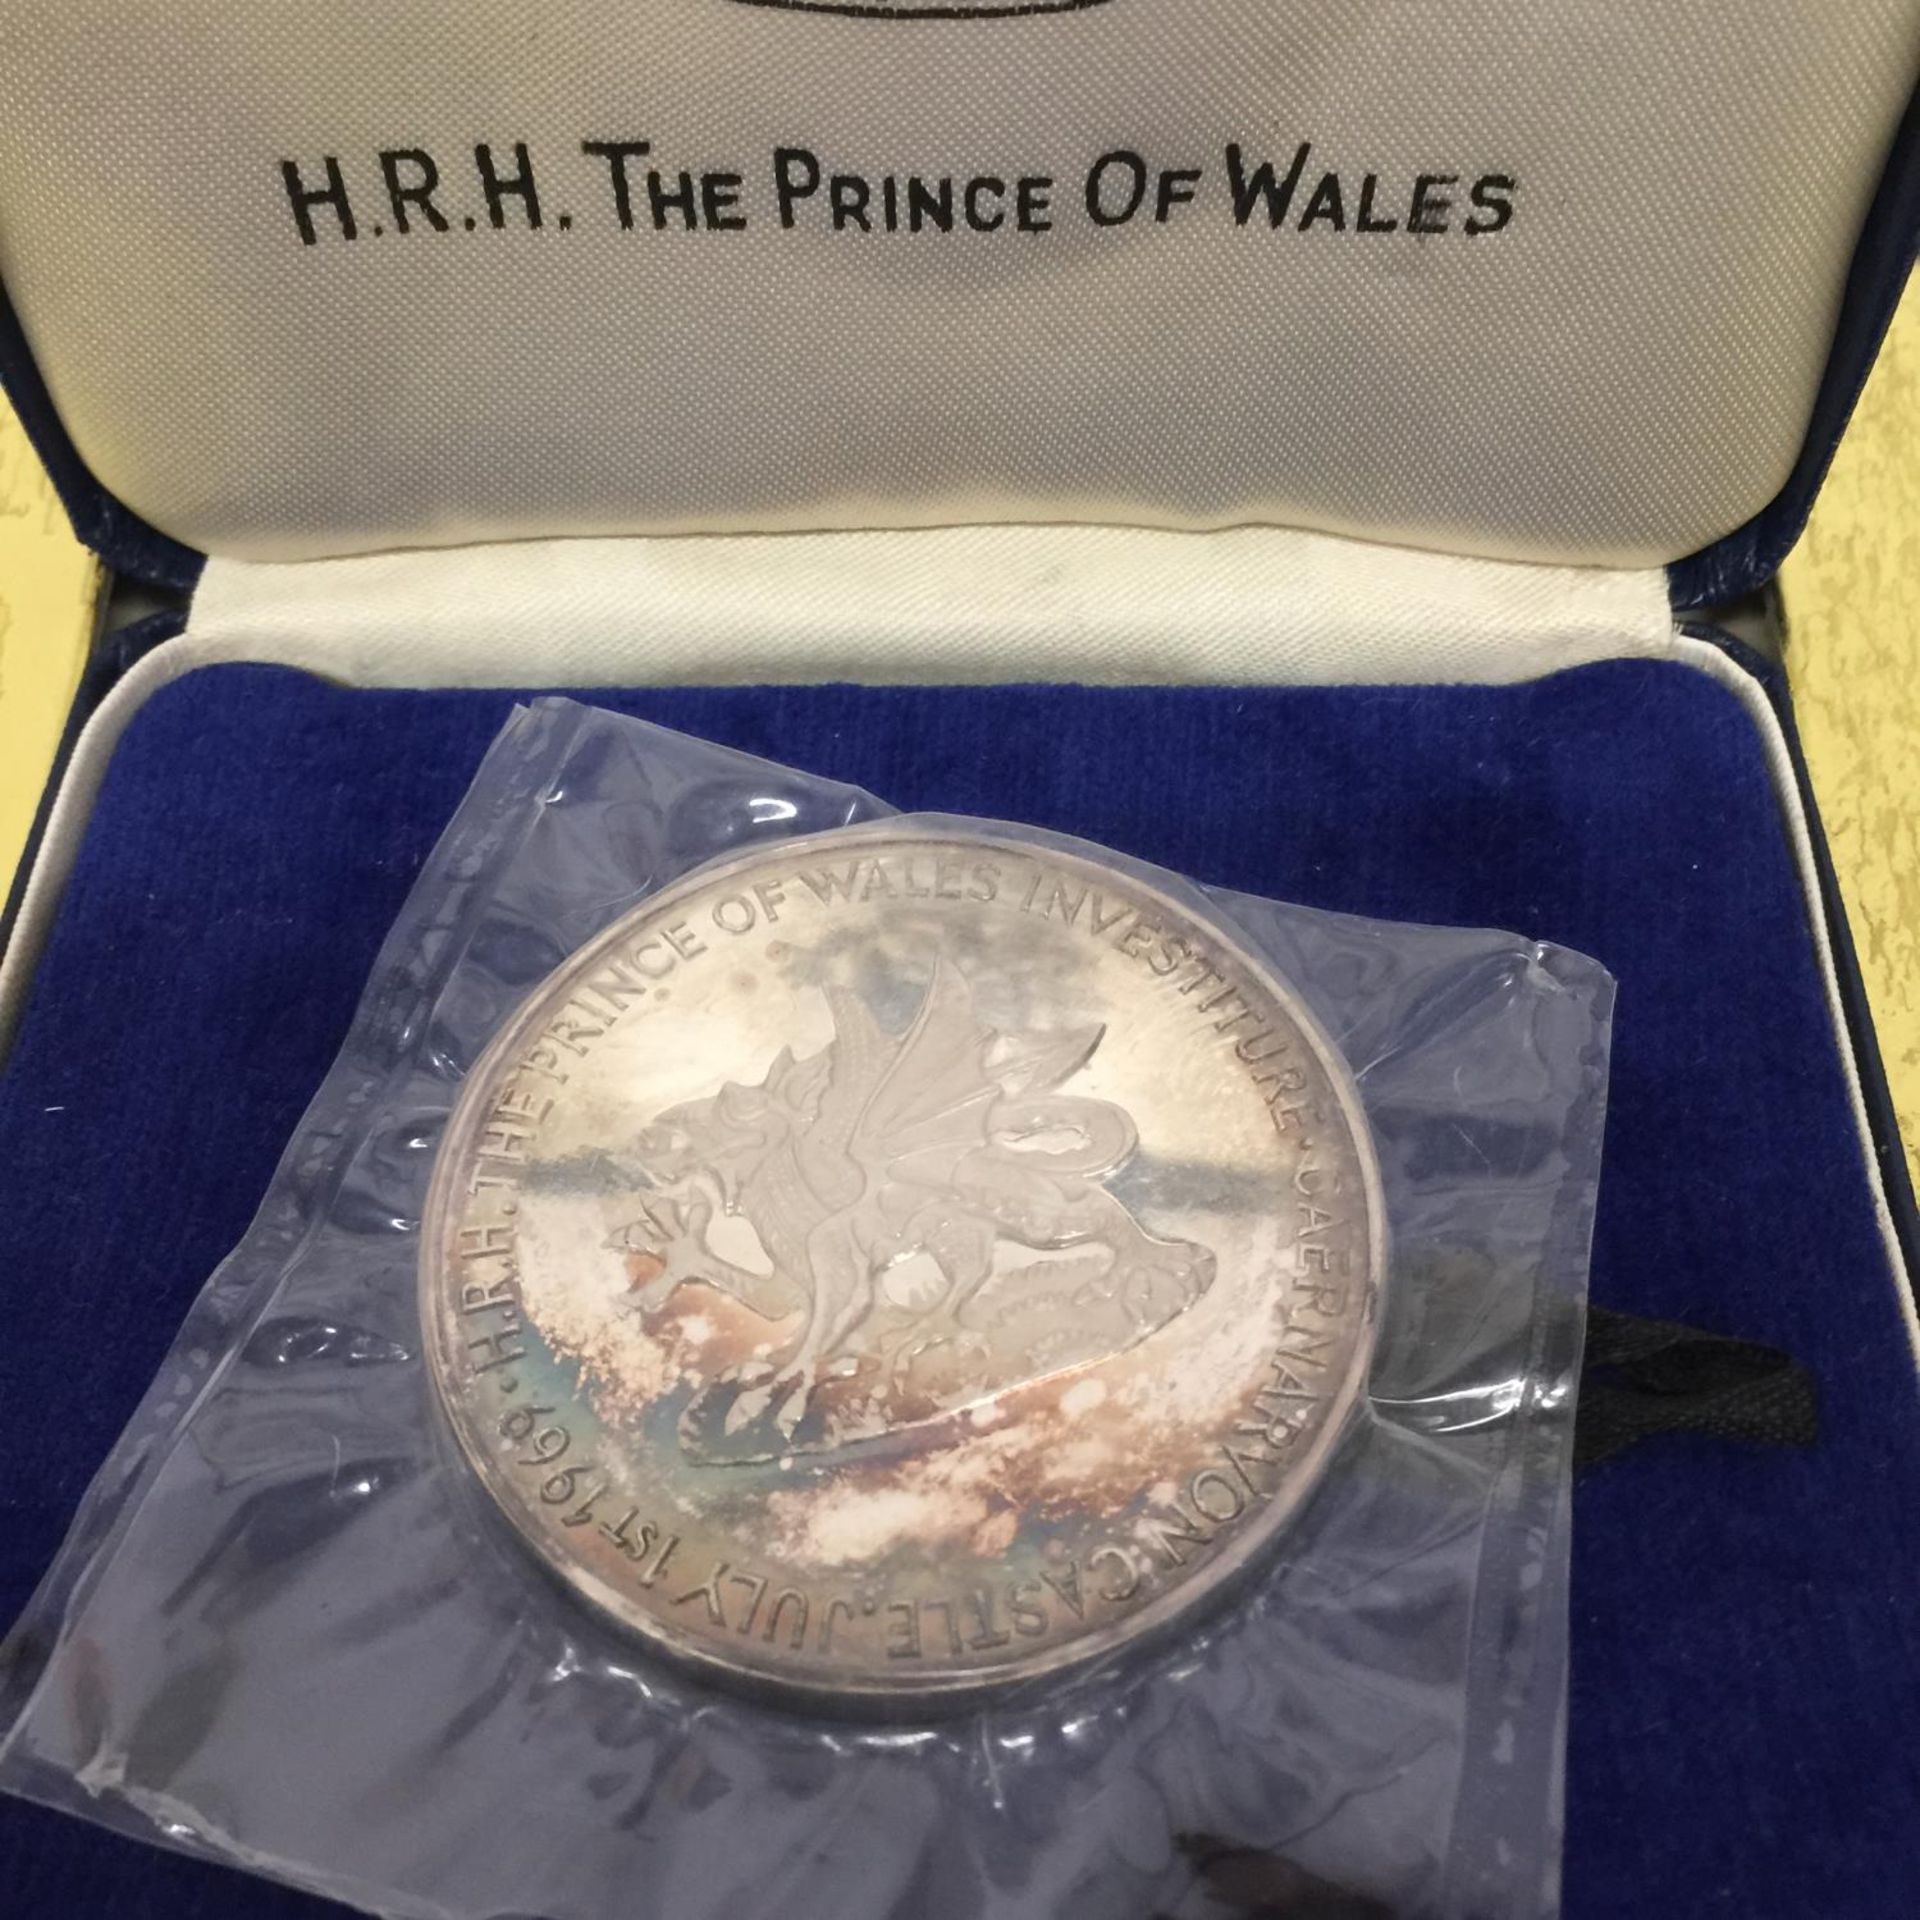 UK , 1969 INVESTITURE OF PRINCE CHARLES , 2 X LARGE SILVER MEDALS , EACH WEIGHS 2.27 OUNCES . EACH - Image 3 of 5